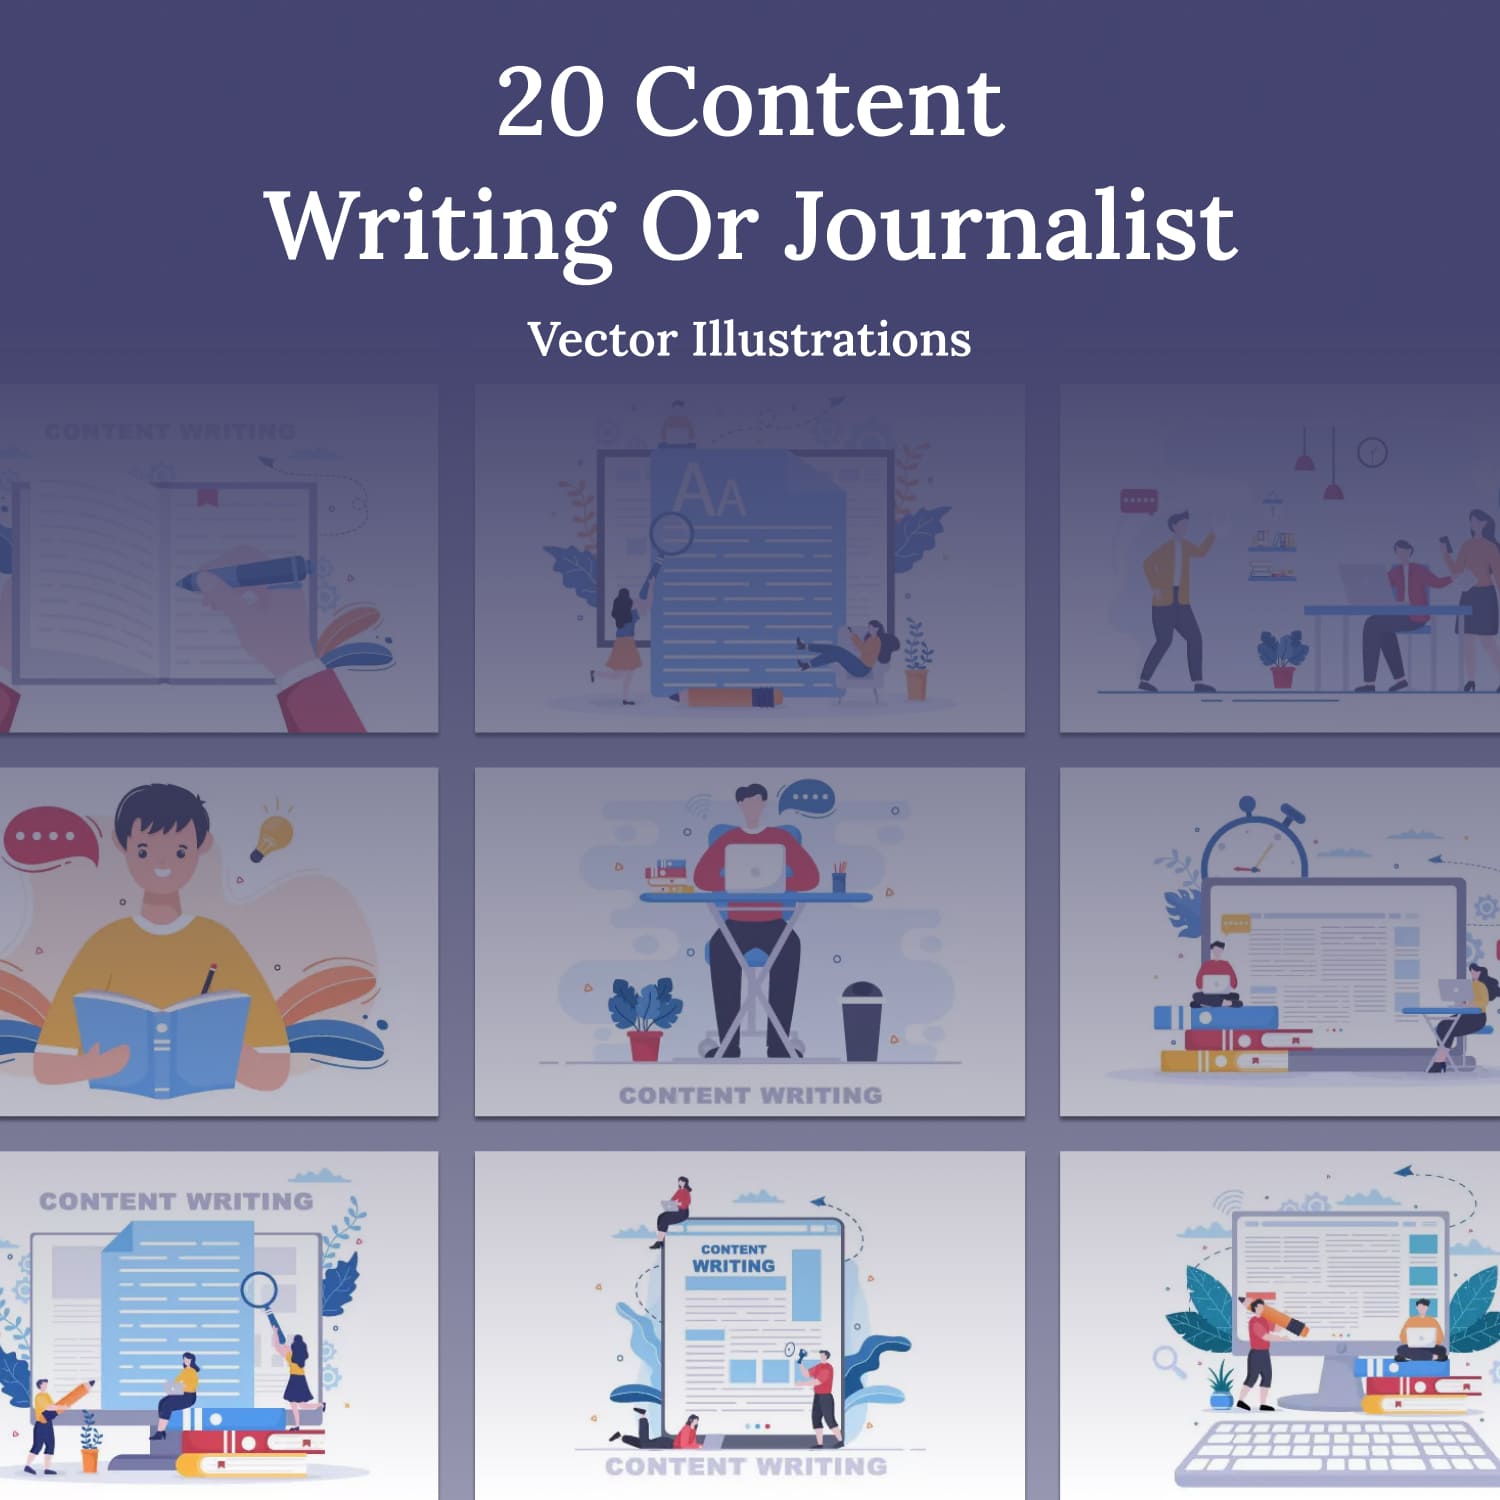 20 Content Writing or Journalist Vector Illustrations.